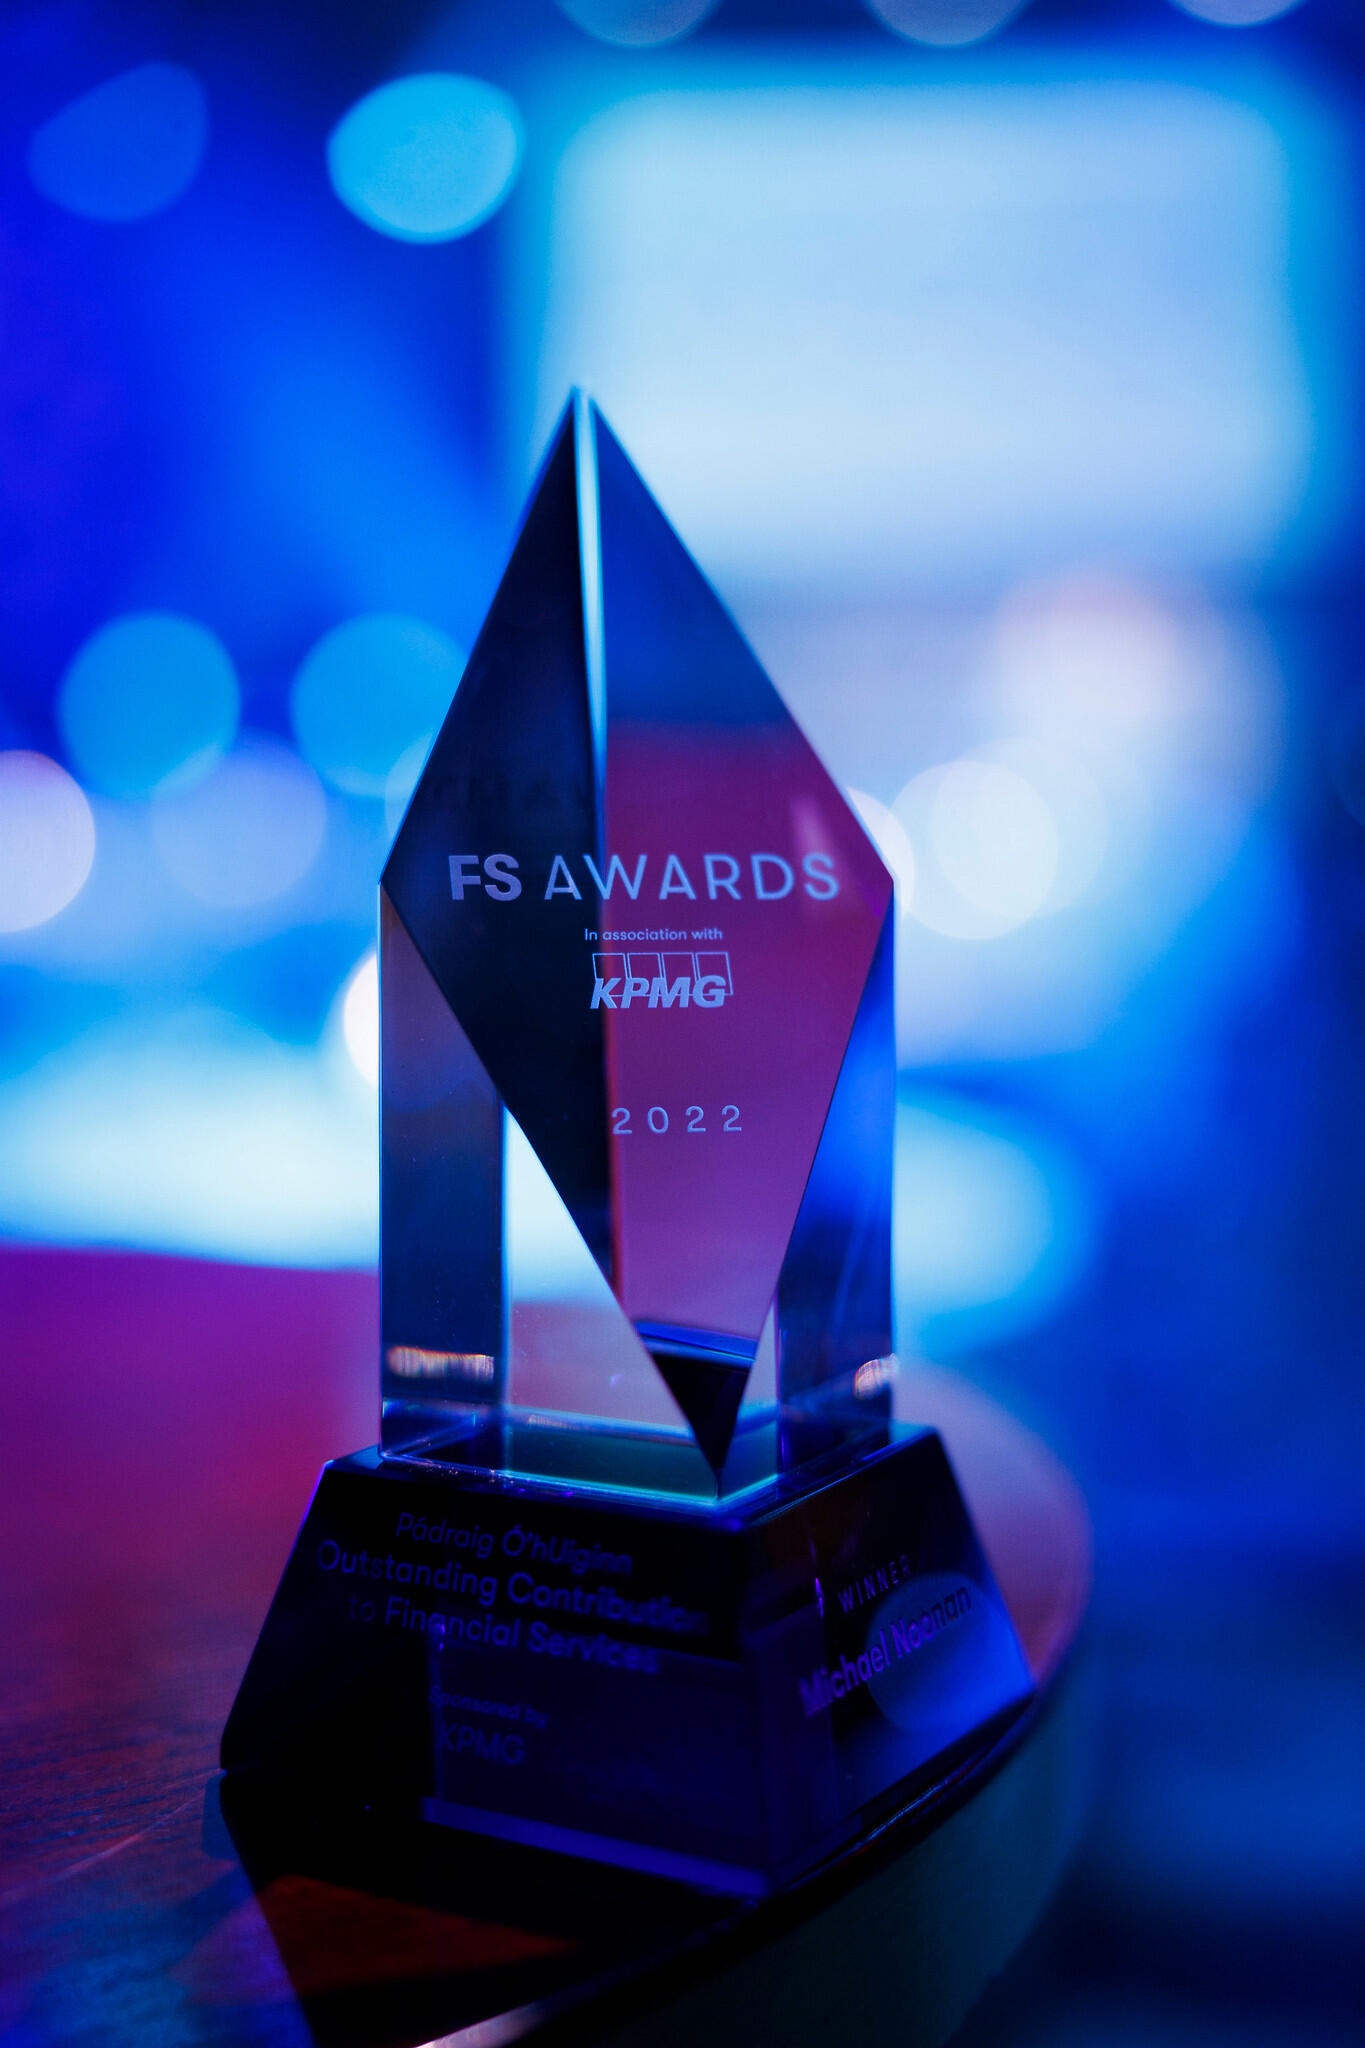 FS Awards trophy for 2022, distributed in association with KPMG. The award is clear and diamond-like, reflecting blue and purple light from the background.